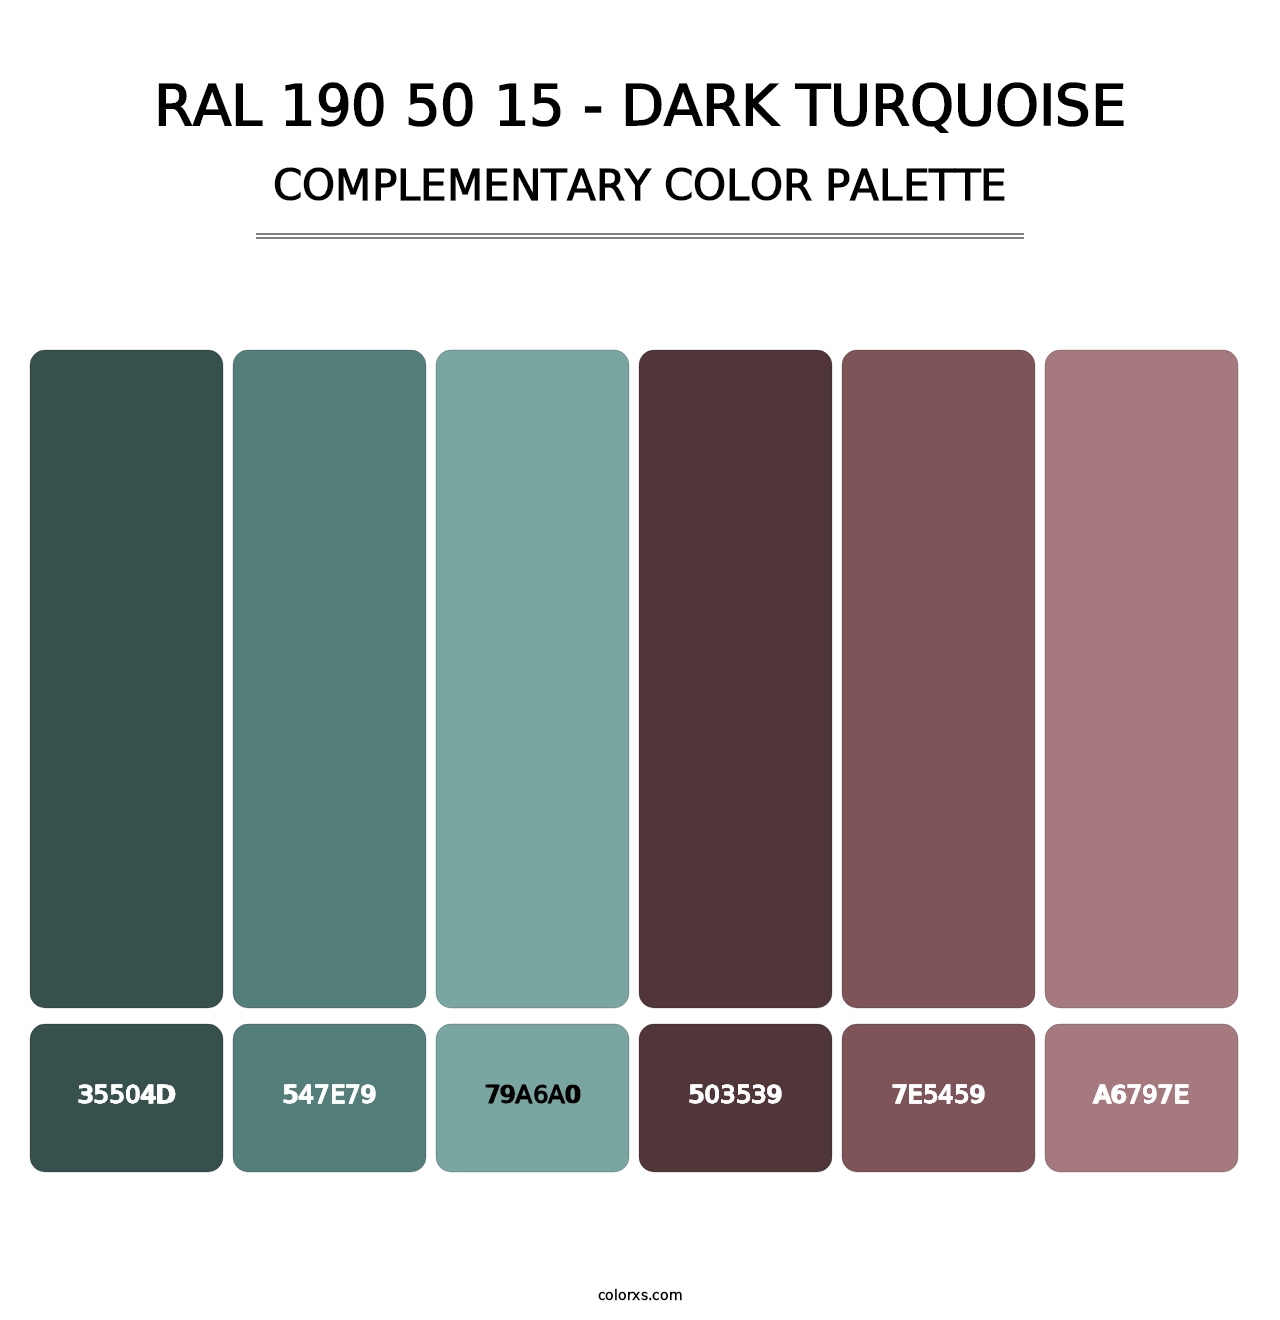 RAL 190 50 15 - Dark Turquoise - Complementary Color Palette